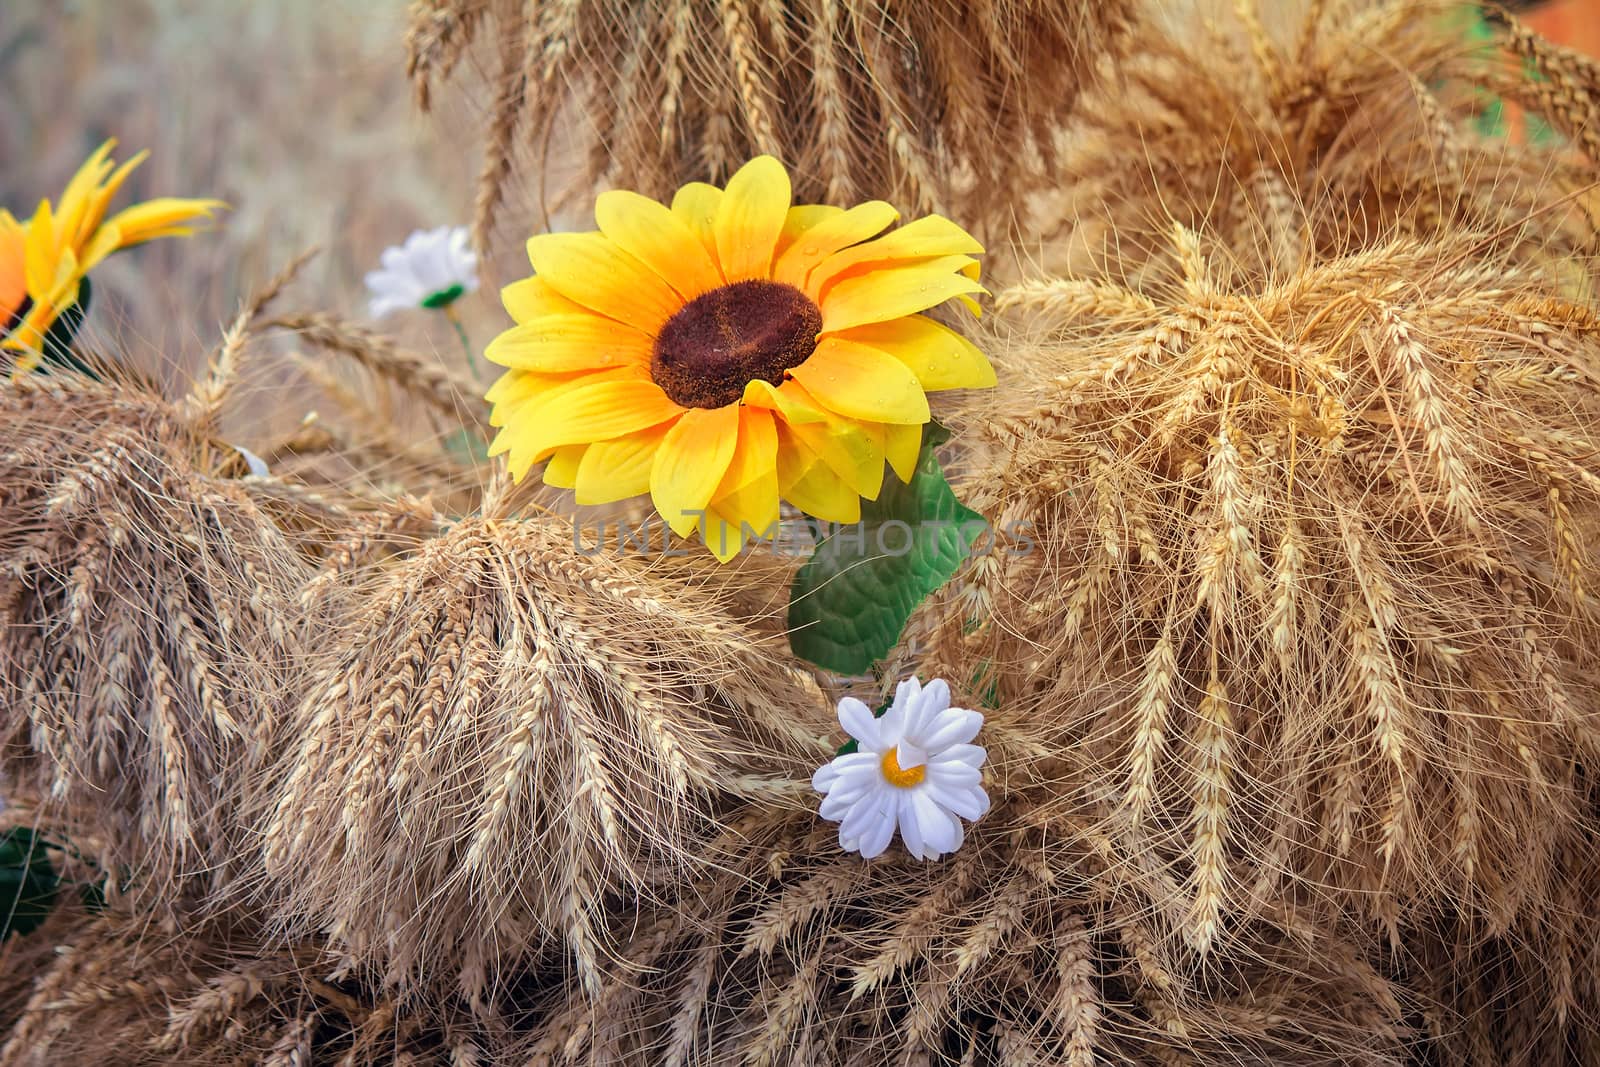 Still life:beautiful white and yellow artificial flowers surrounded by ears of ripe rye.